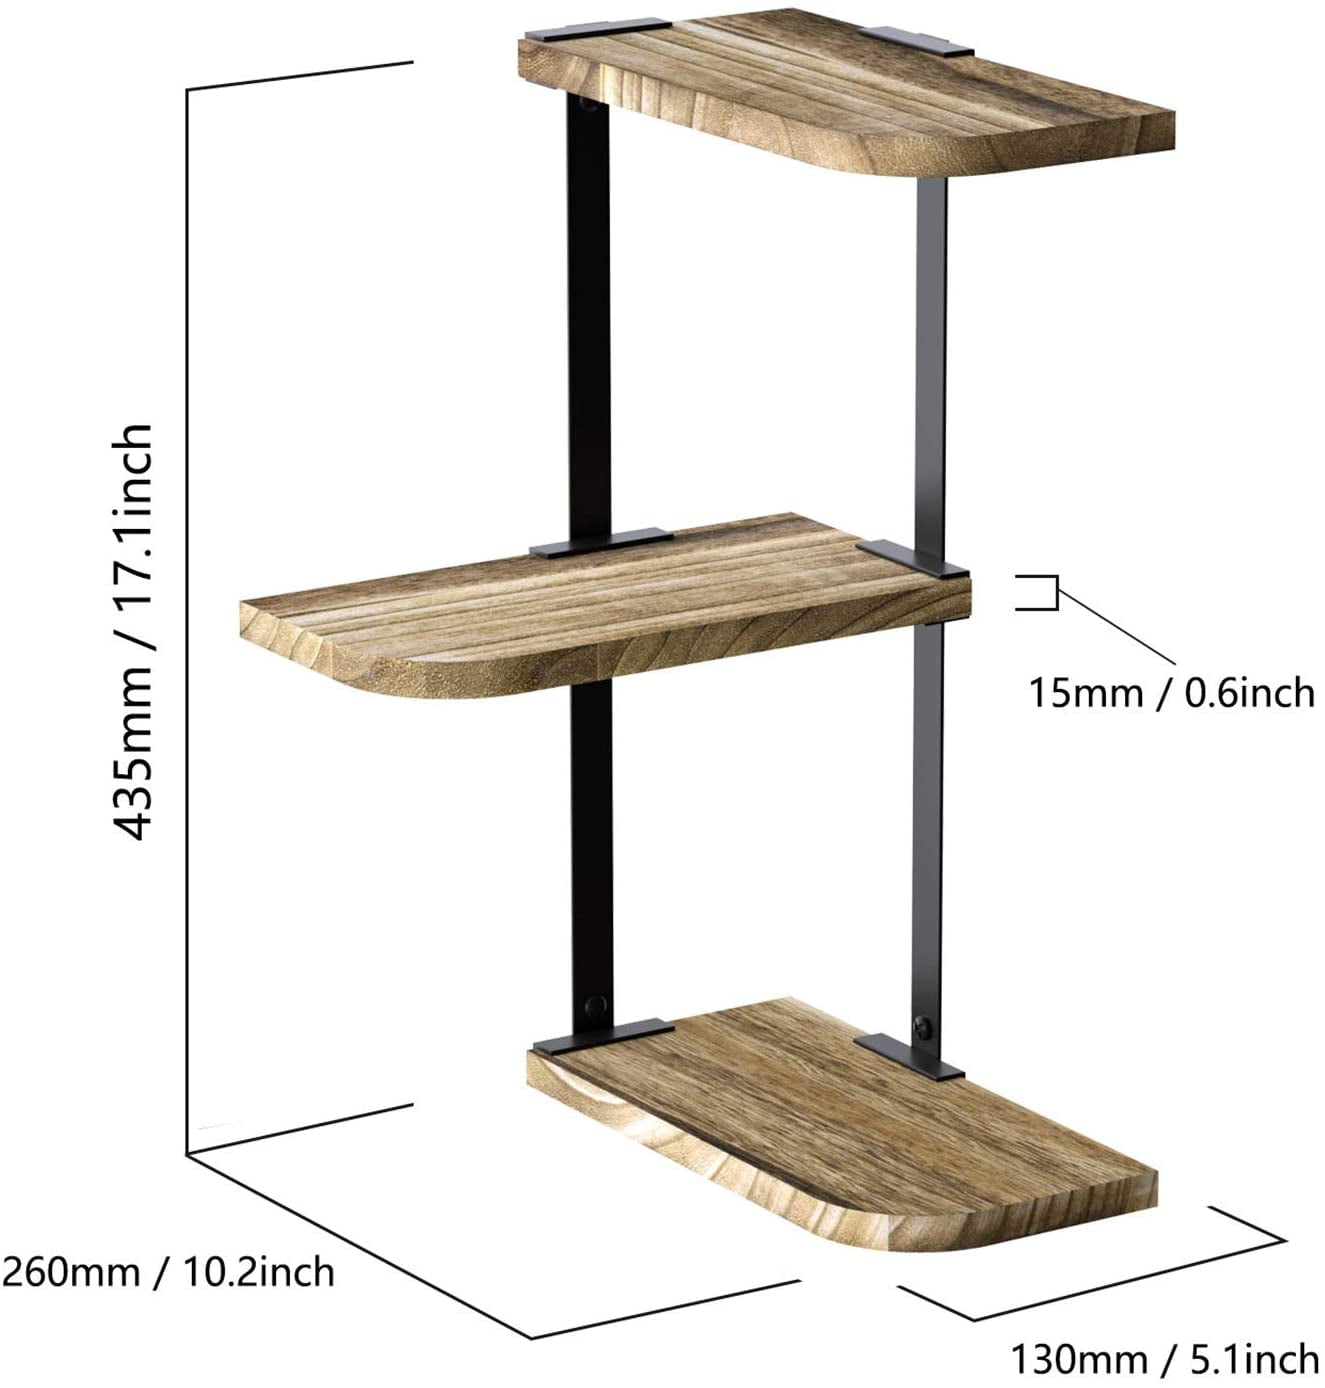 Details about   Love-KANKEI Corner Shelf Wall Mount of 5 Tier Rustic Wood Floating Shelves Wall 